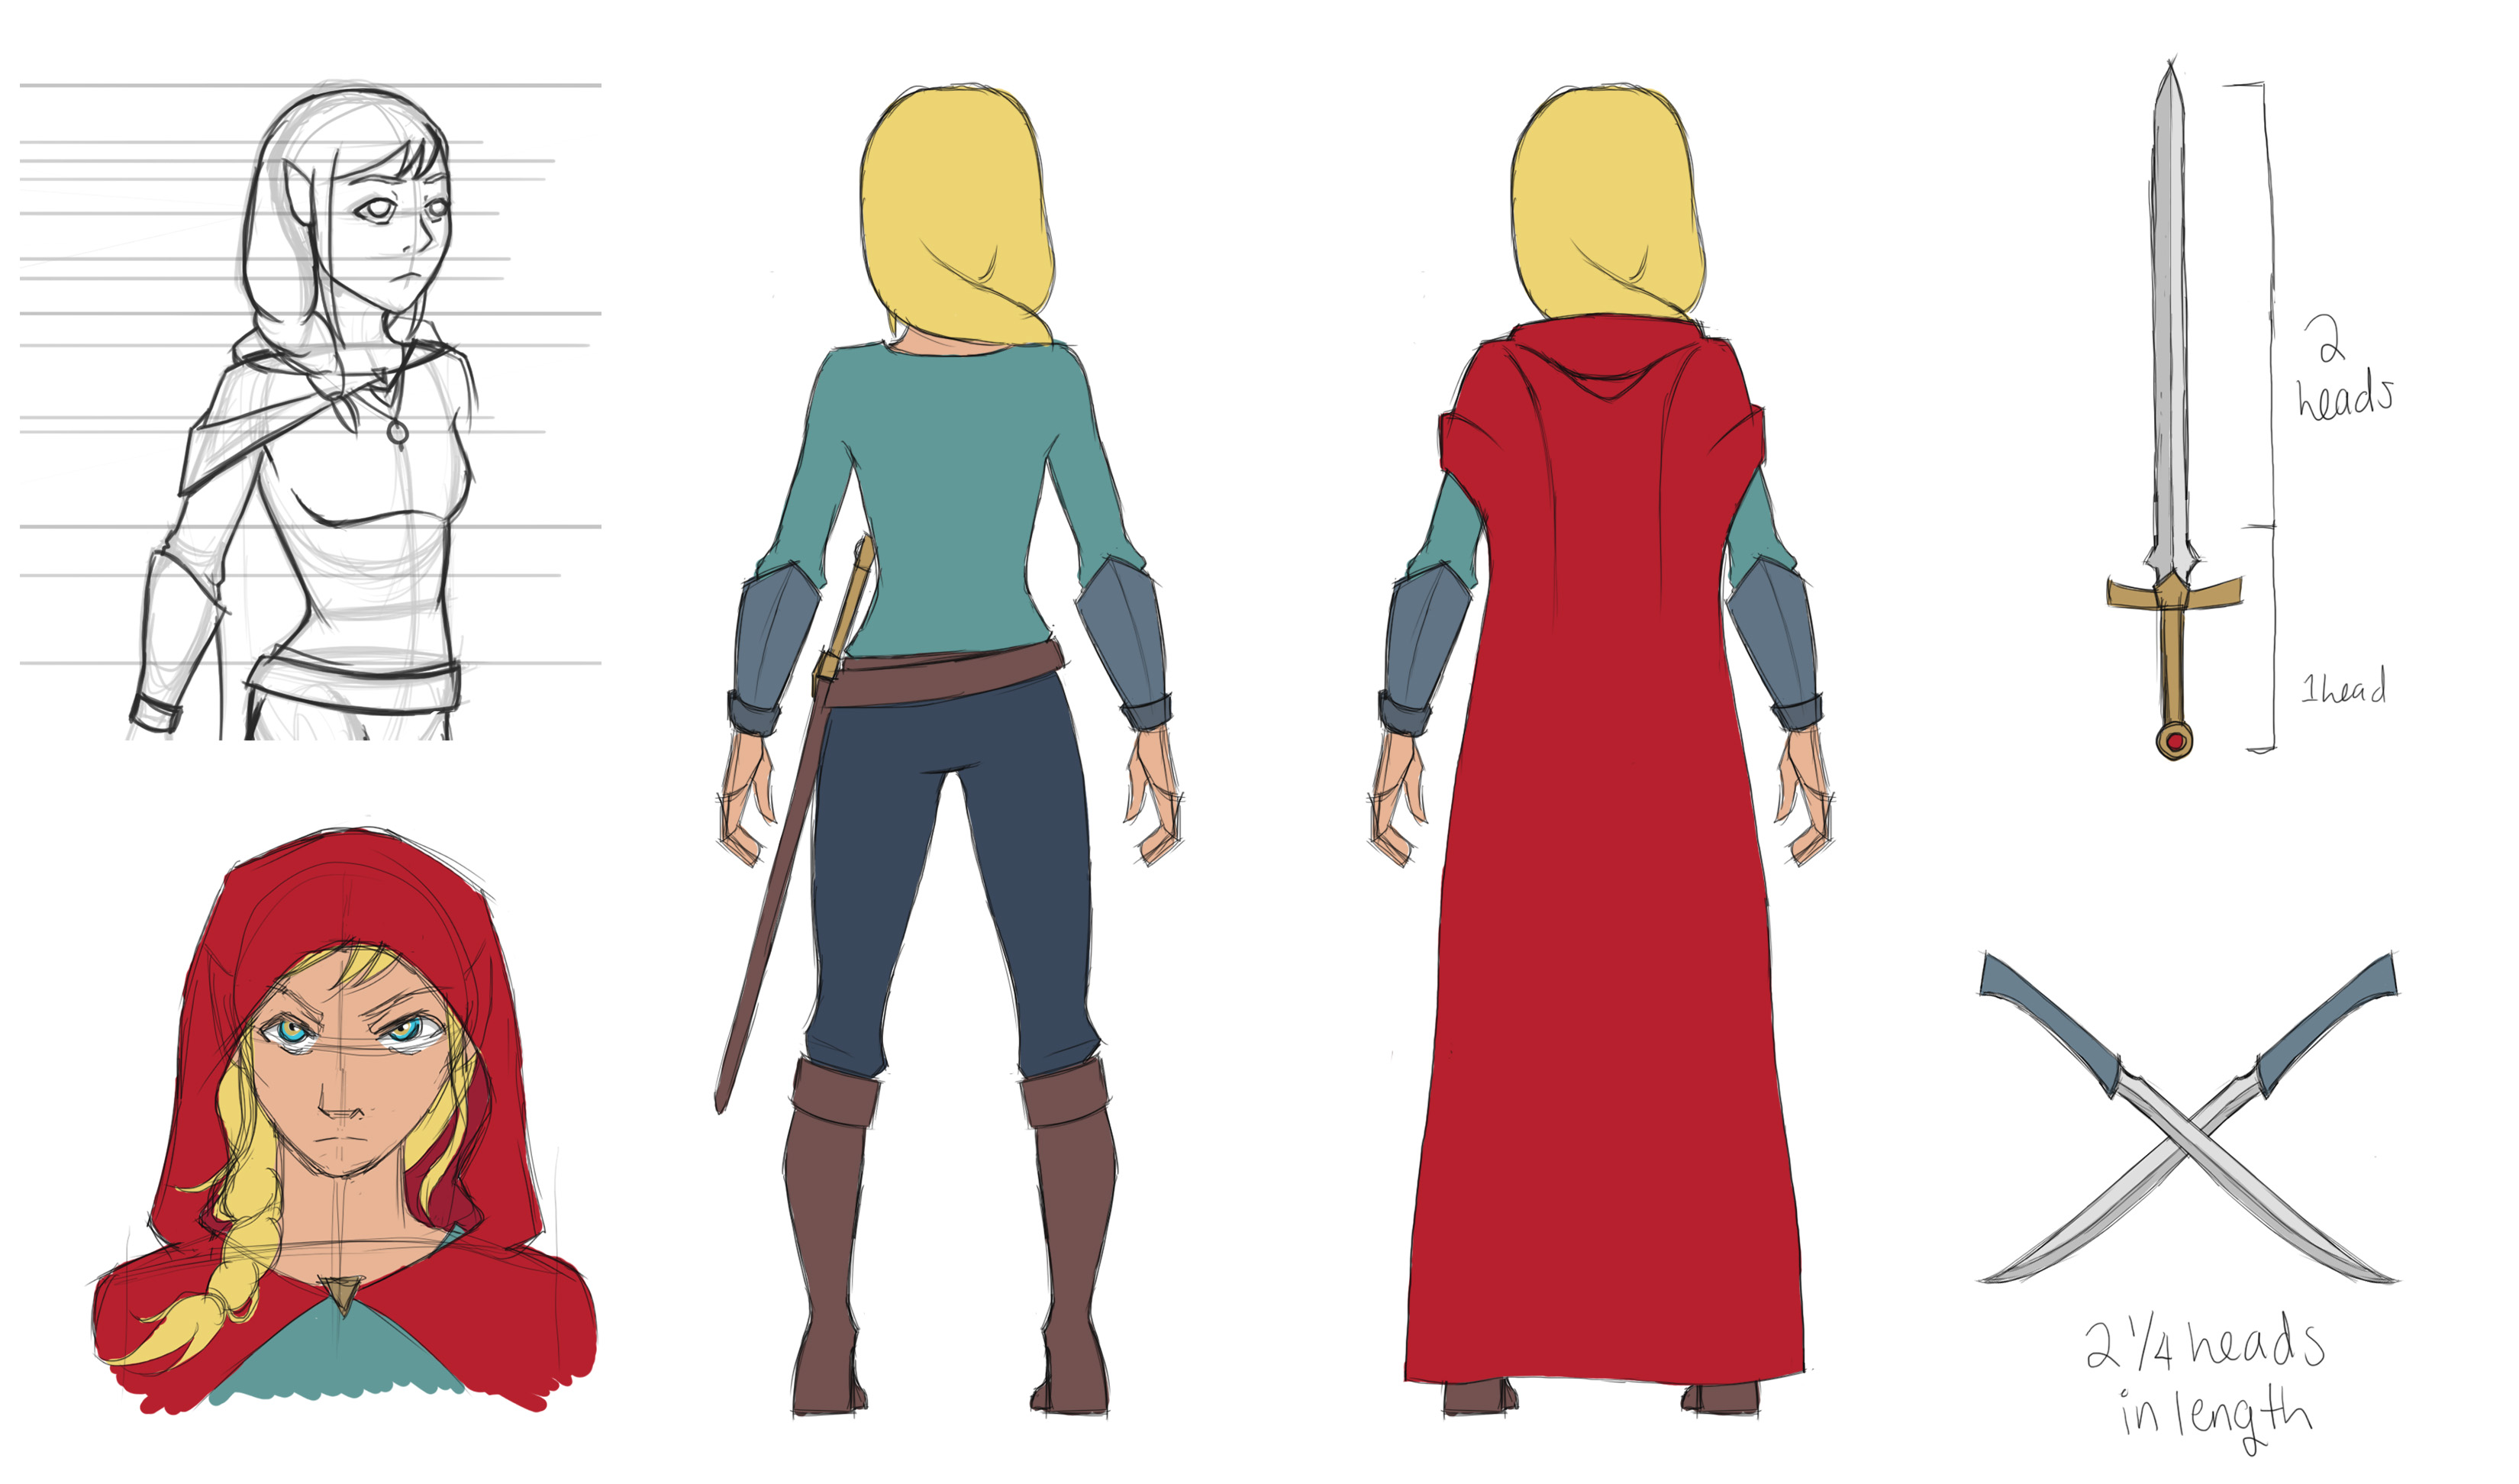 Average girl with gold-blonde hair and golden eyes. Her ears are slightly pointed. Donning a deep red cloak that acts as a cape, cool-themed shirt, gauntlets, and pants, as well as a sword belt and boots. Her hair is braided and to the side. There are several views of her – a ¾ view, two back views, and an emotional view. She is looking at us intently. Her swords are displayed – two twin swords of dark silver, and one longsword of gold and ruby.